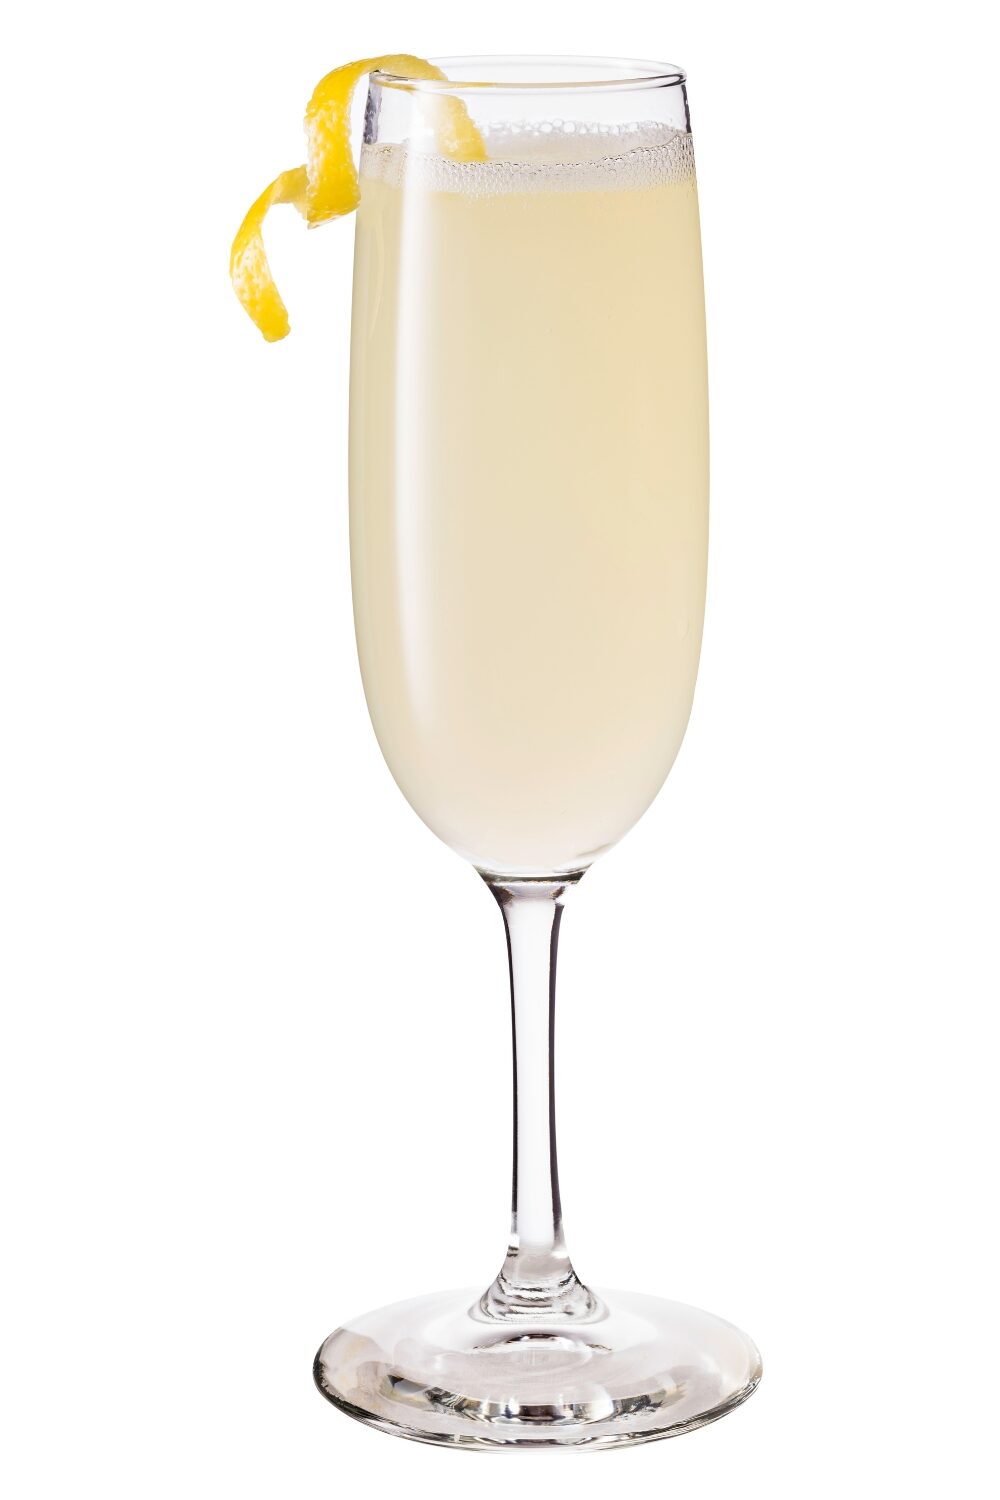 A bubbly and sophisticated cocktail made with gin, lemon juice, sugar-free sweetener, and topped with sparkling wine, served in a flute.